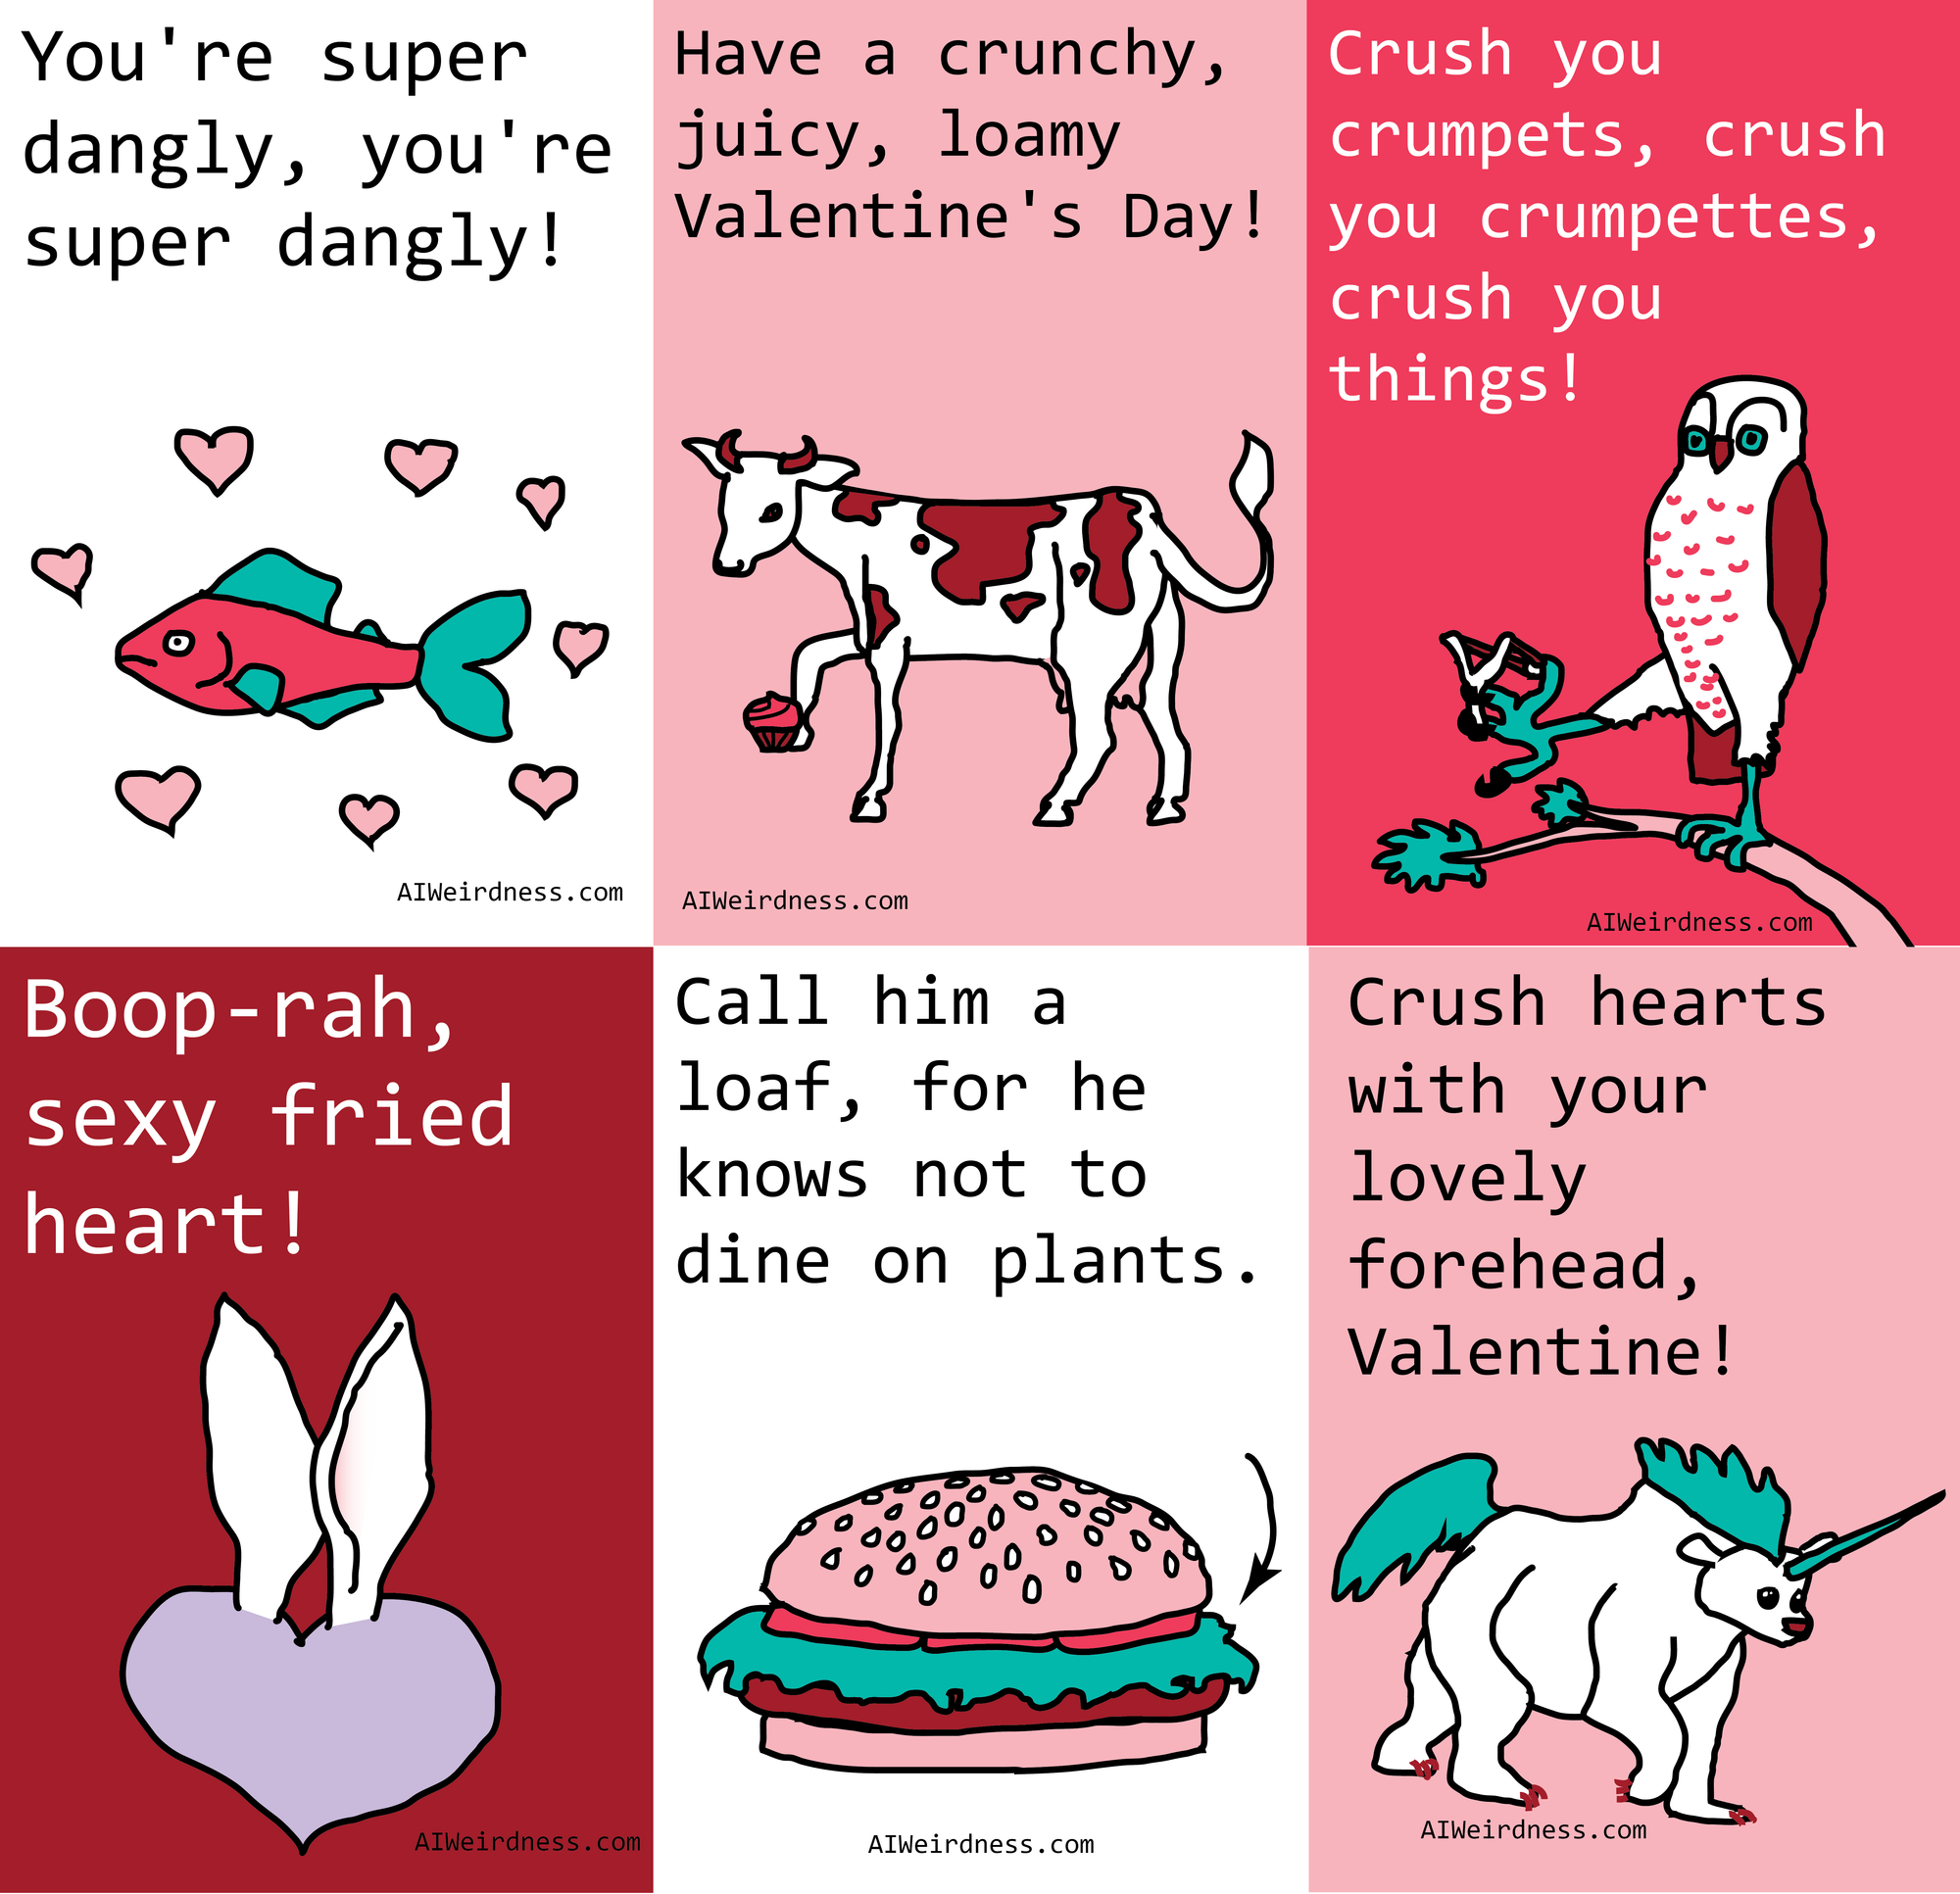 Boop-rah, sexy fried heart! - Image of a purple heart with bunny ears Have a crunchy, juicy, loamy Valentine's Day! - Image of a cow holding a cupcake Crush you crumpets, crush you crumpettes, crush you things! - Image of a owl with a slingshot You're super dangly, you're super dangly! - Image of a fish surrounded by hearts Call him a loaf, for he knows not to dine on plants. - Image of a hamburger with arrow pointing at lettuce Crush hearts with your lovely forehead, Valentine! - Image of a unicorn-bear hybrid